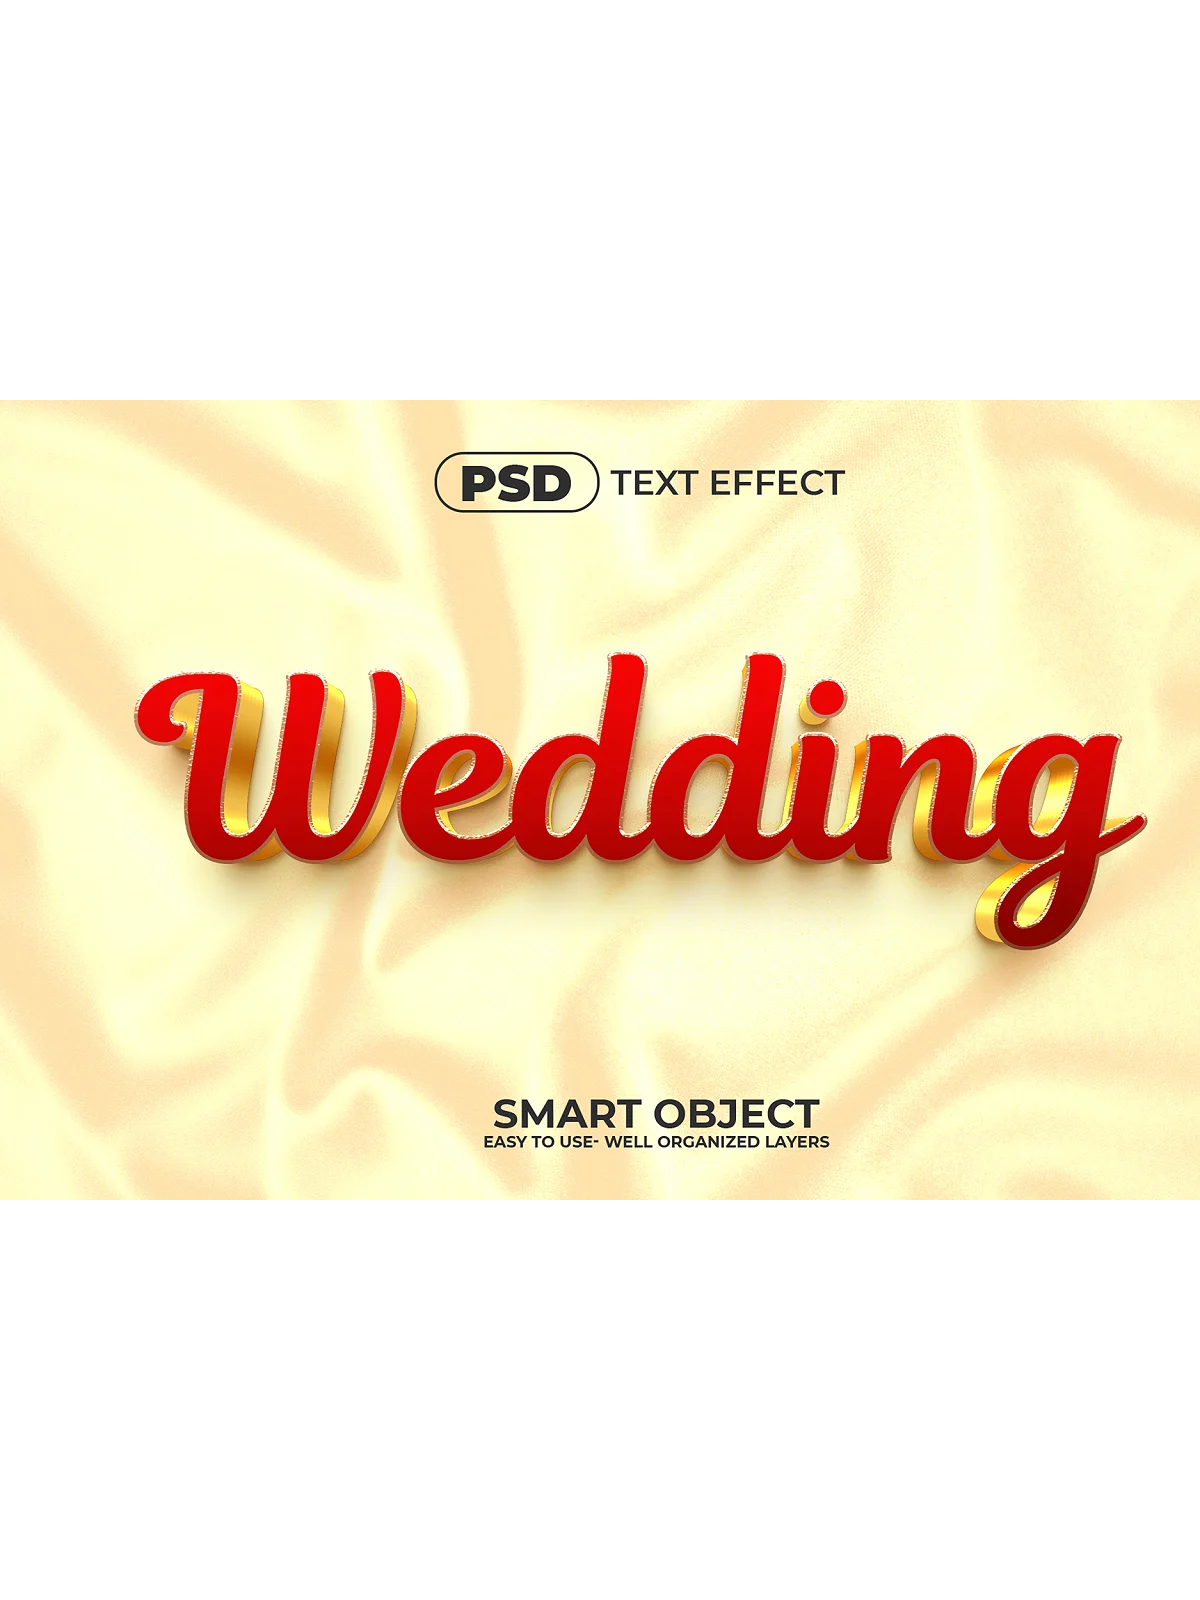 A red and yellow wedding text effect.